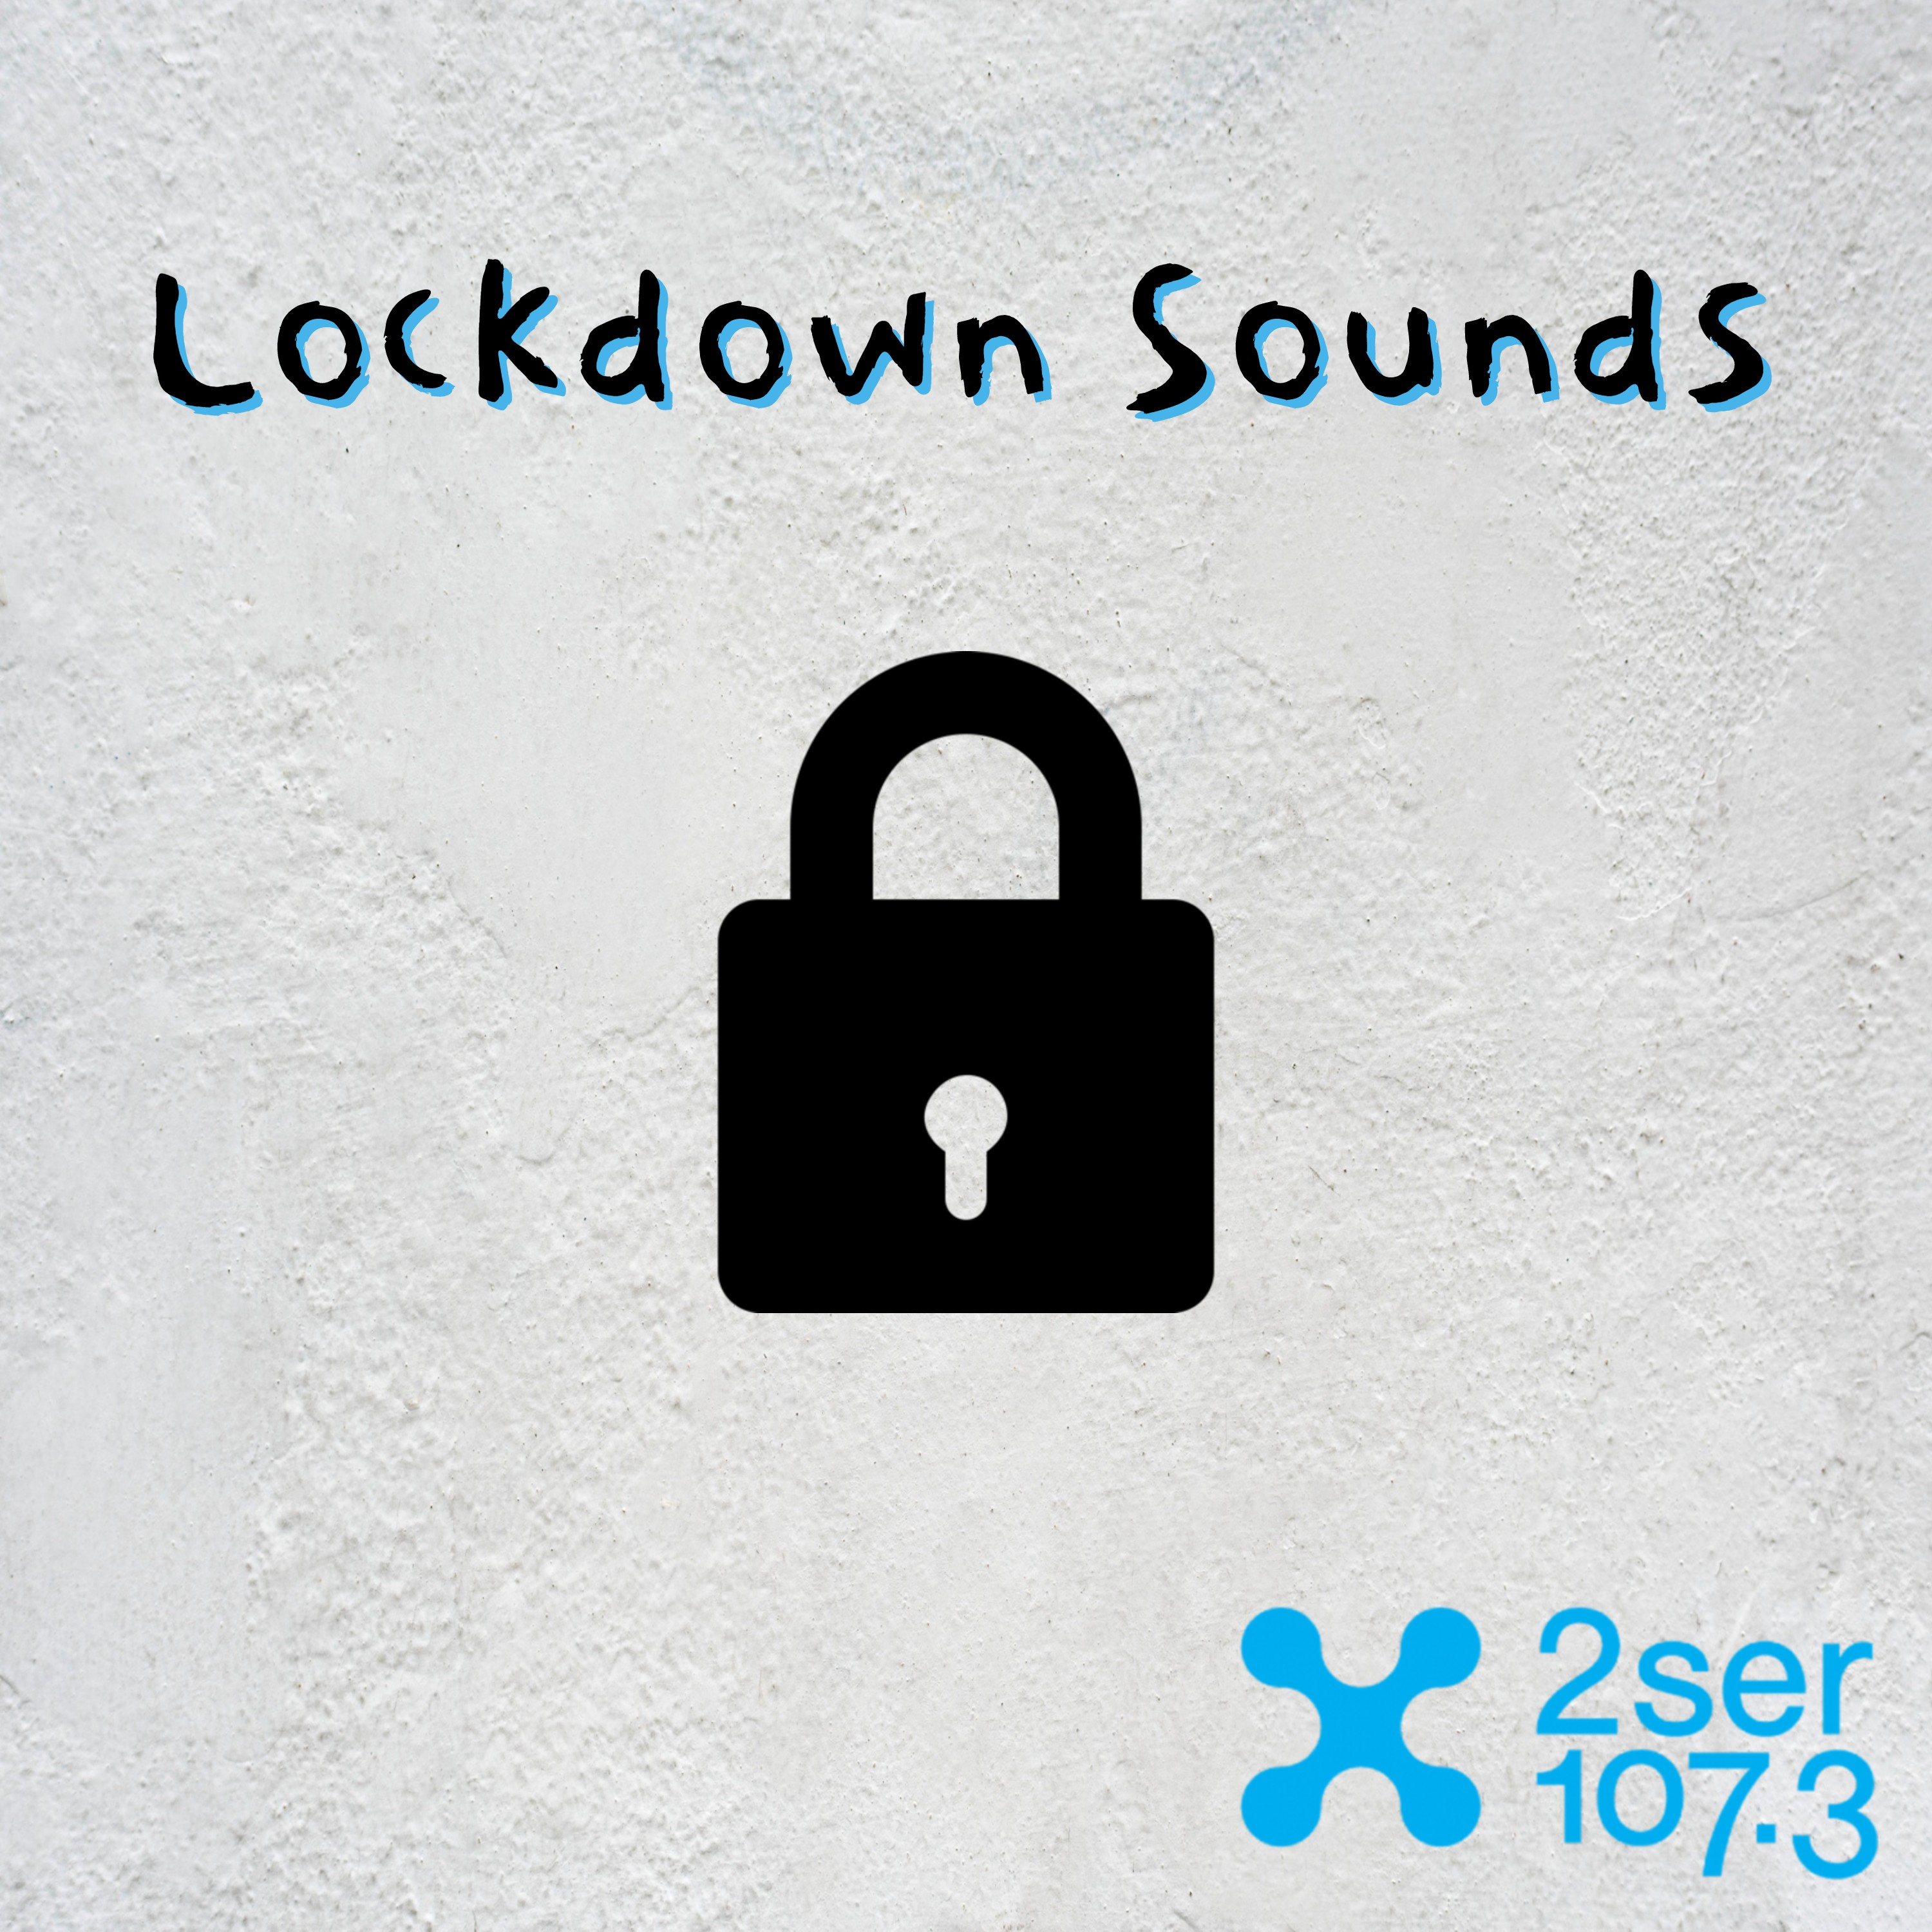 Welcome to Lockdown Sounds